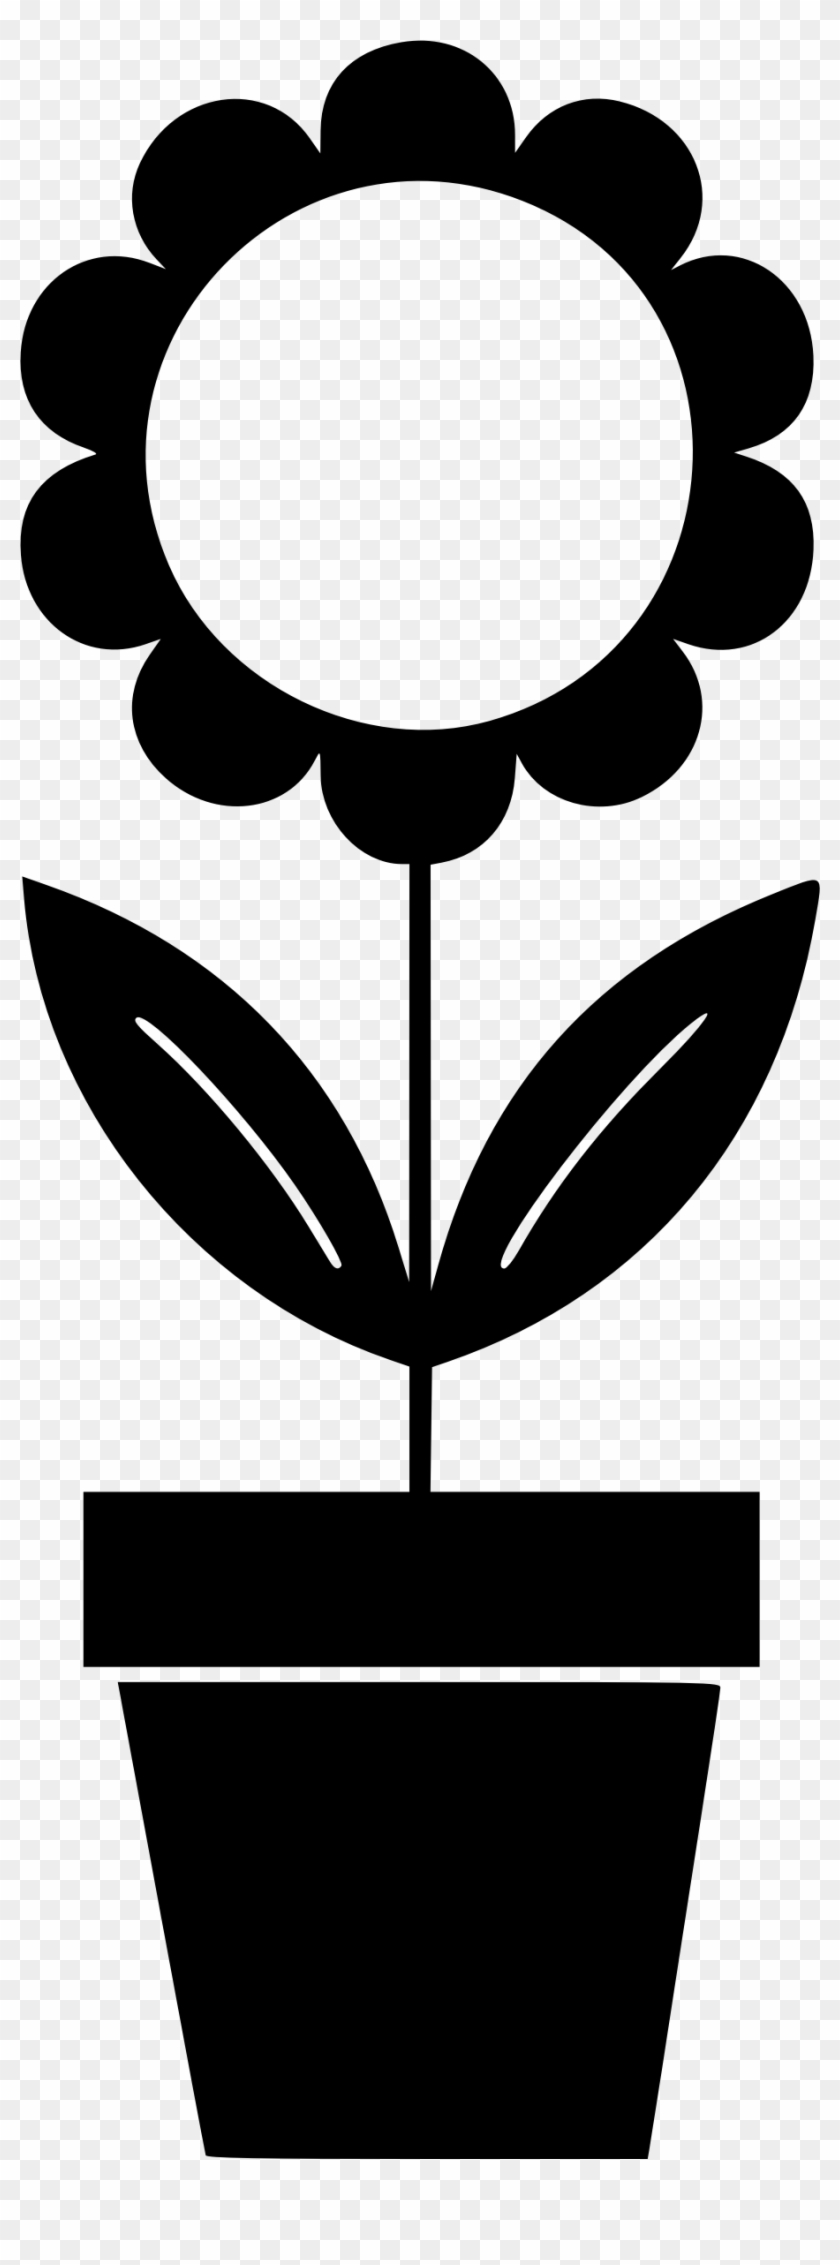 This Free Icons Png Design Of Potted Plant 6 Clipart #1164569